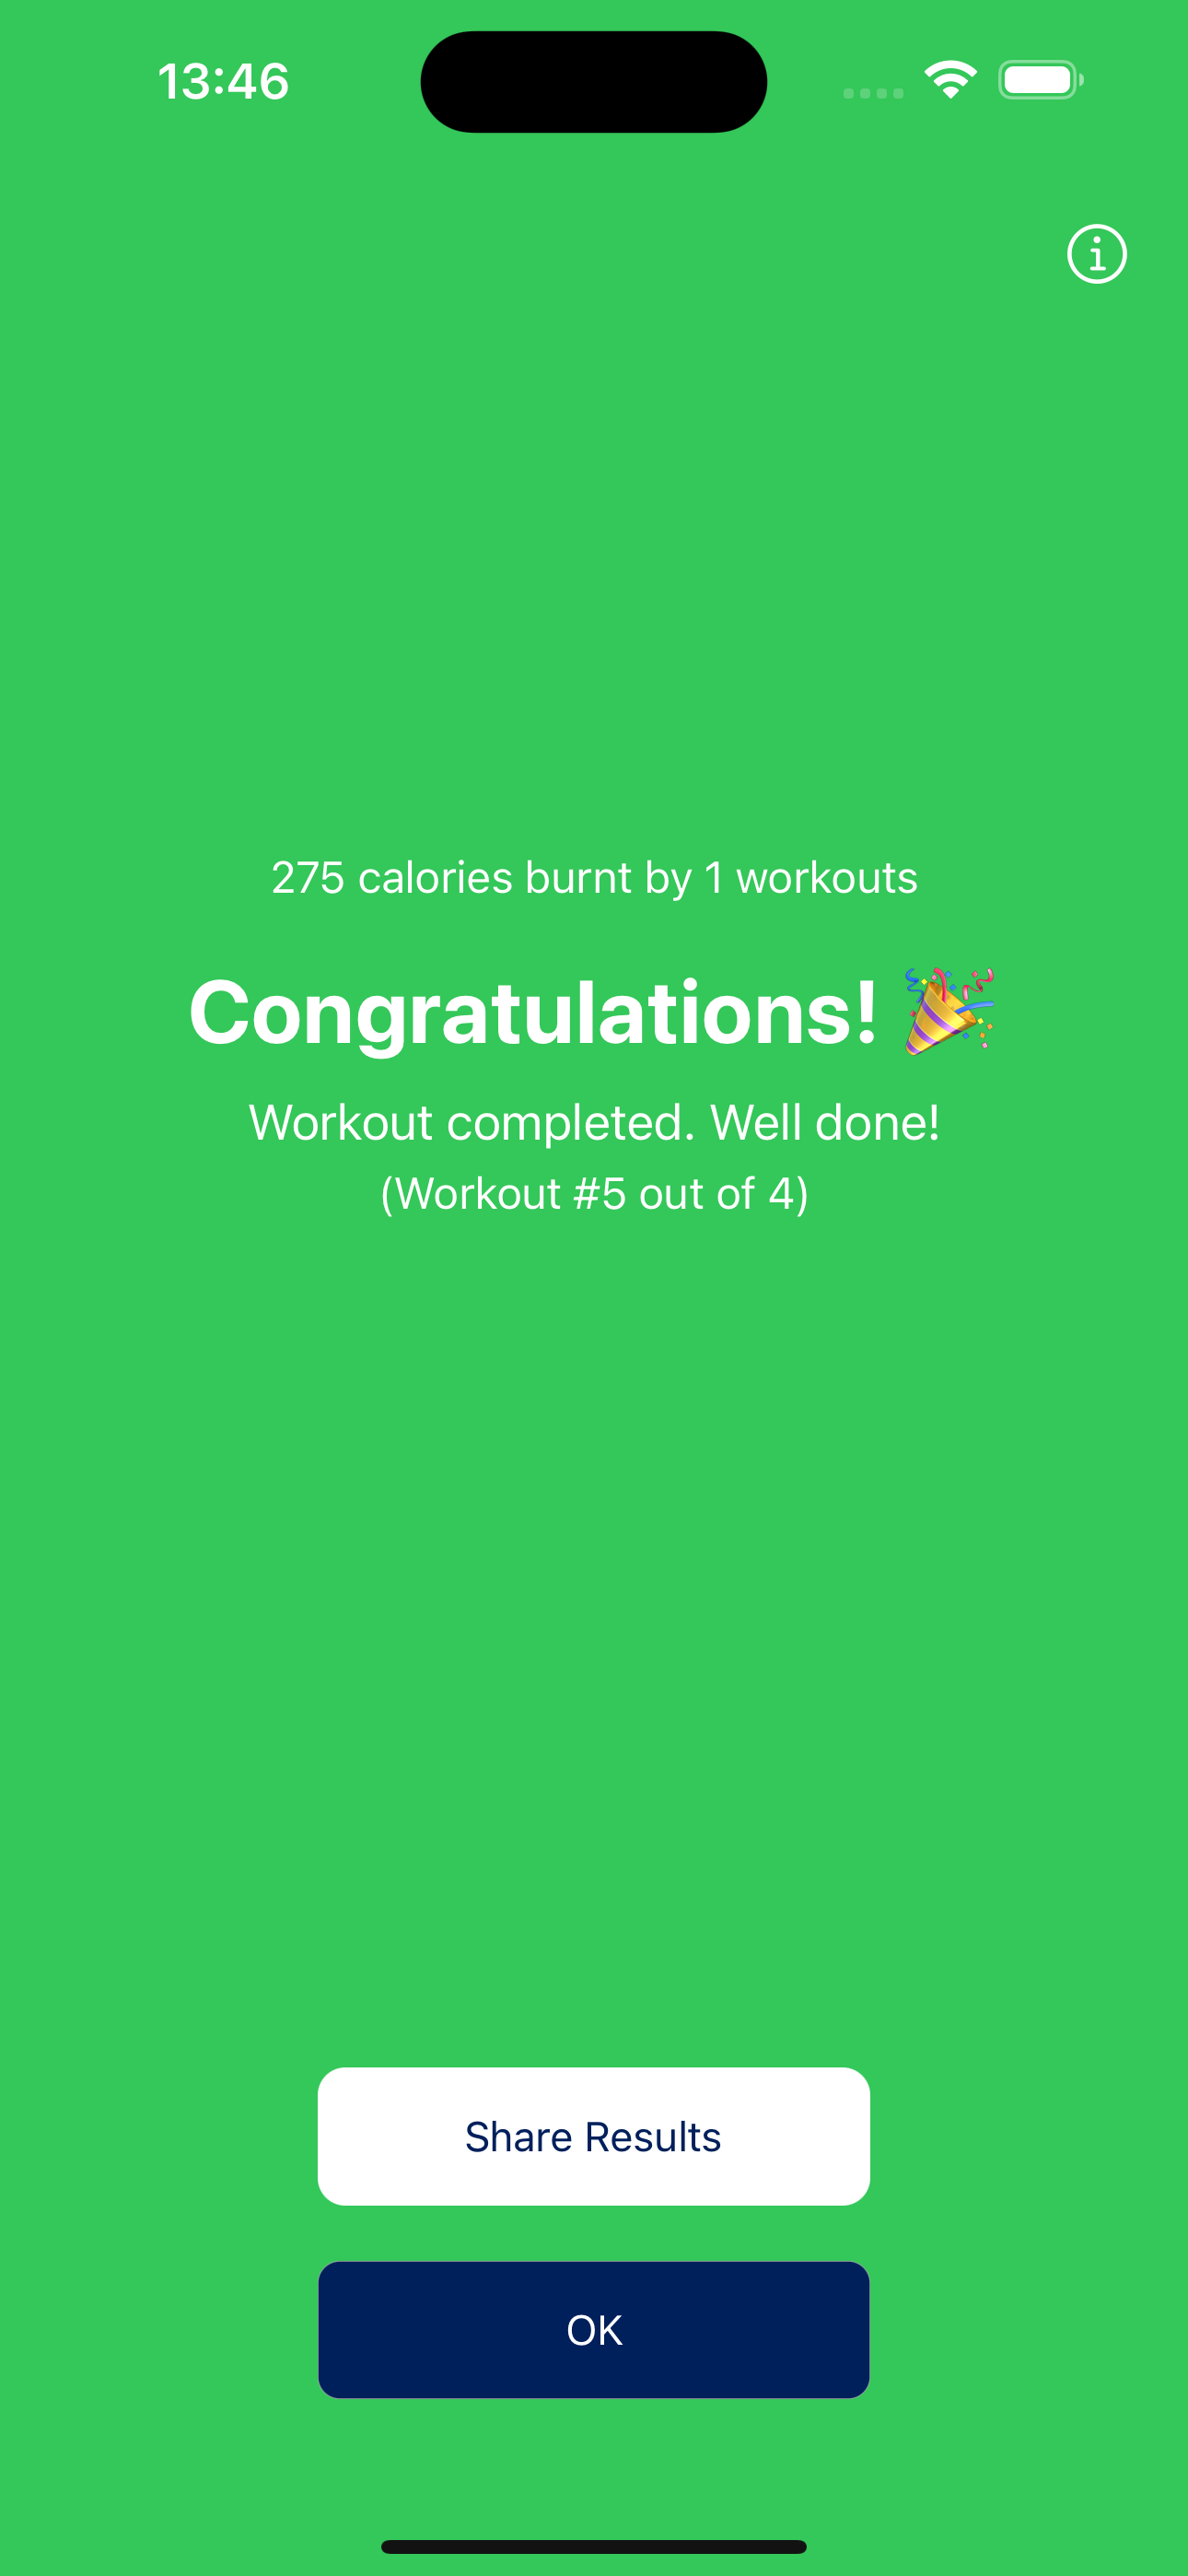 Norwegian 4x4 Protocol Norwegian 4x4 Protocol App Workout Completed